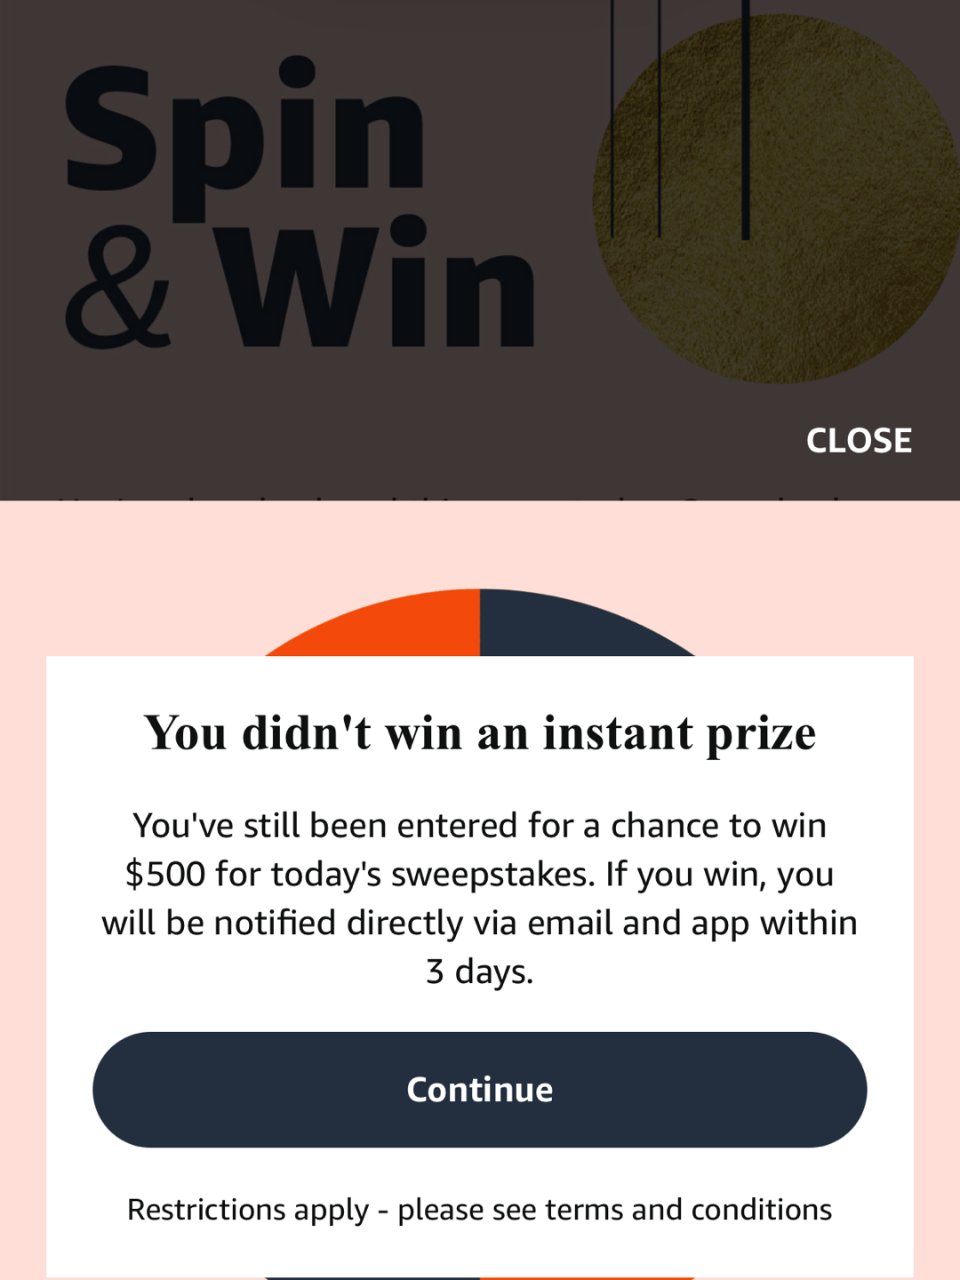  Amazon spin and win